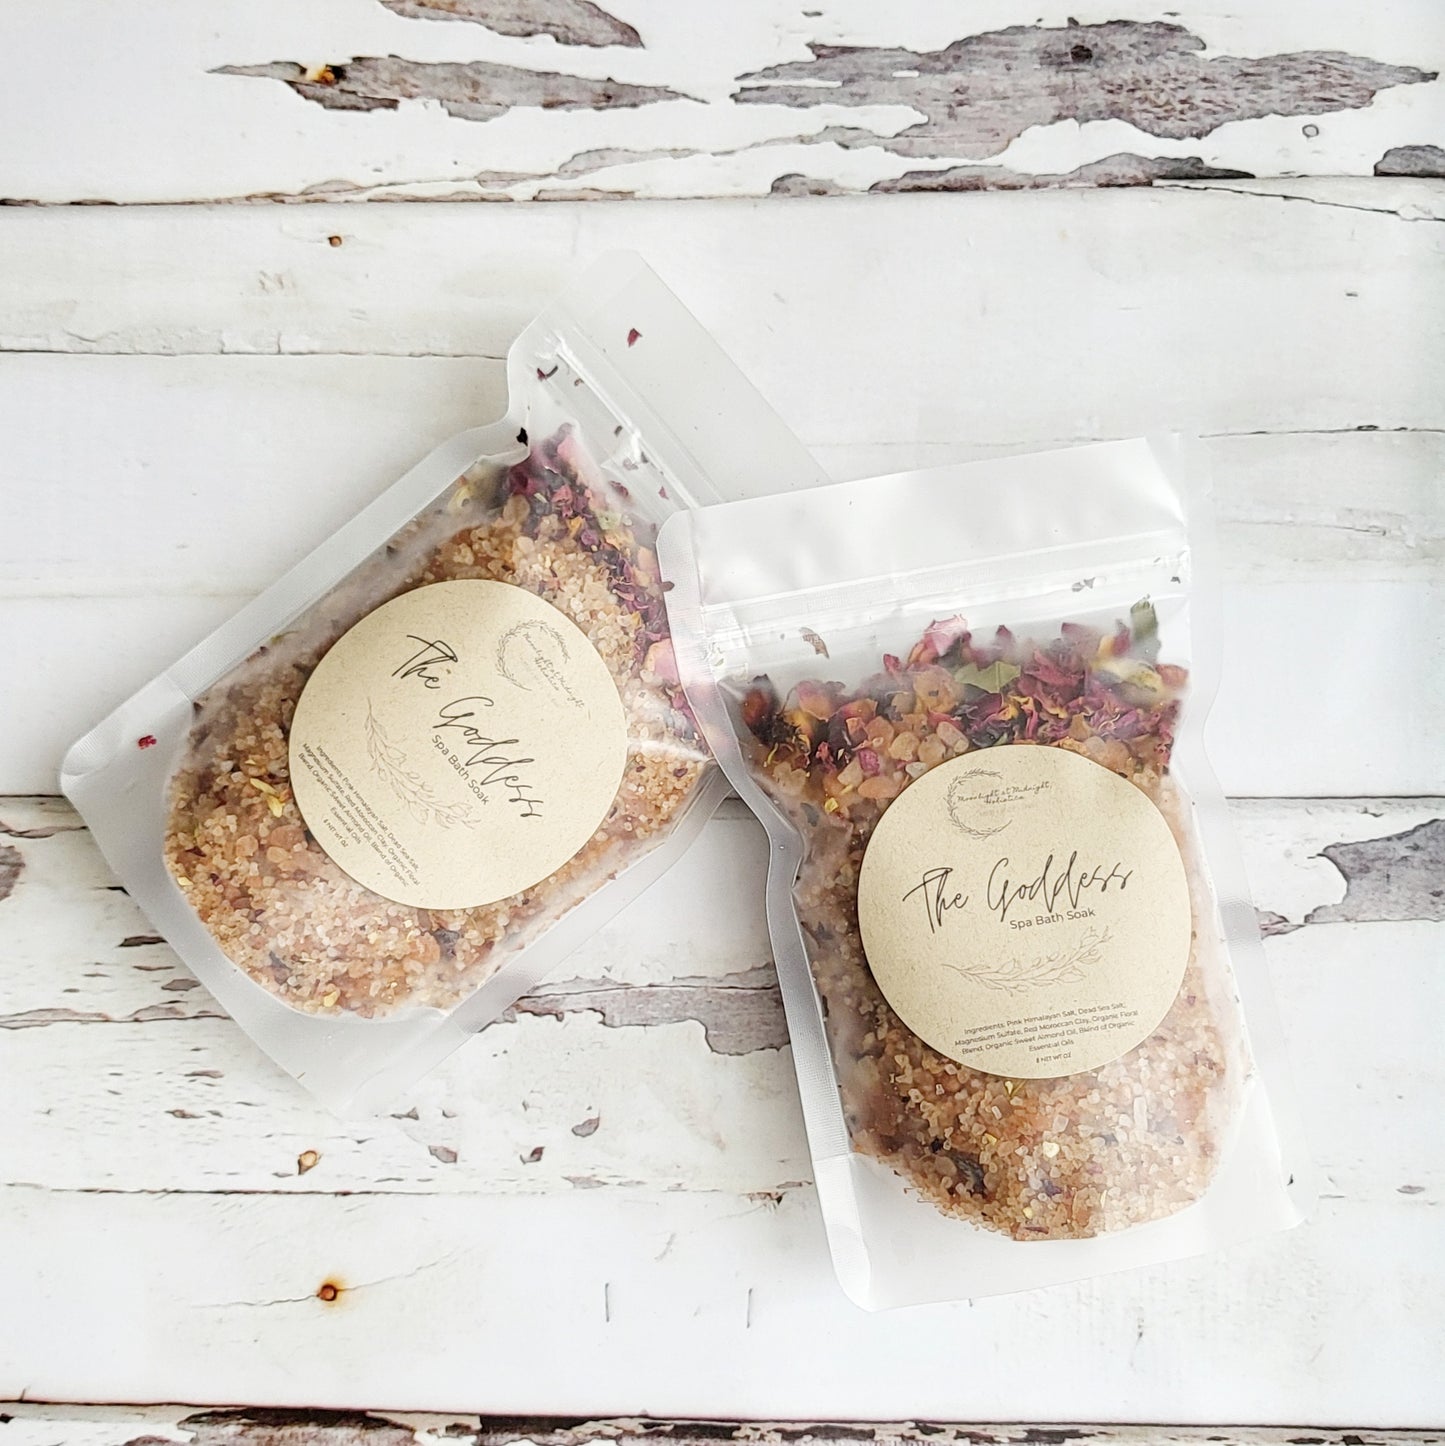 GODDESS Bath Salt |Pink Himalayan & Dead Sea Salt | Floral Bath Soak for Attraction and Beauty| All Natural Ingredients |Aromatherapy |Vegan